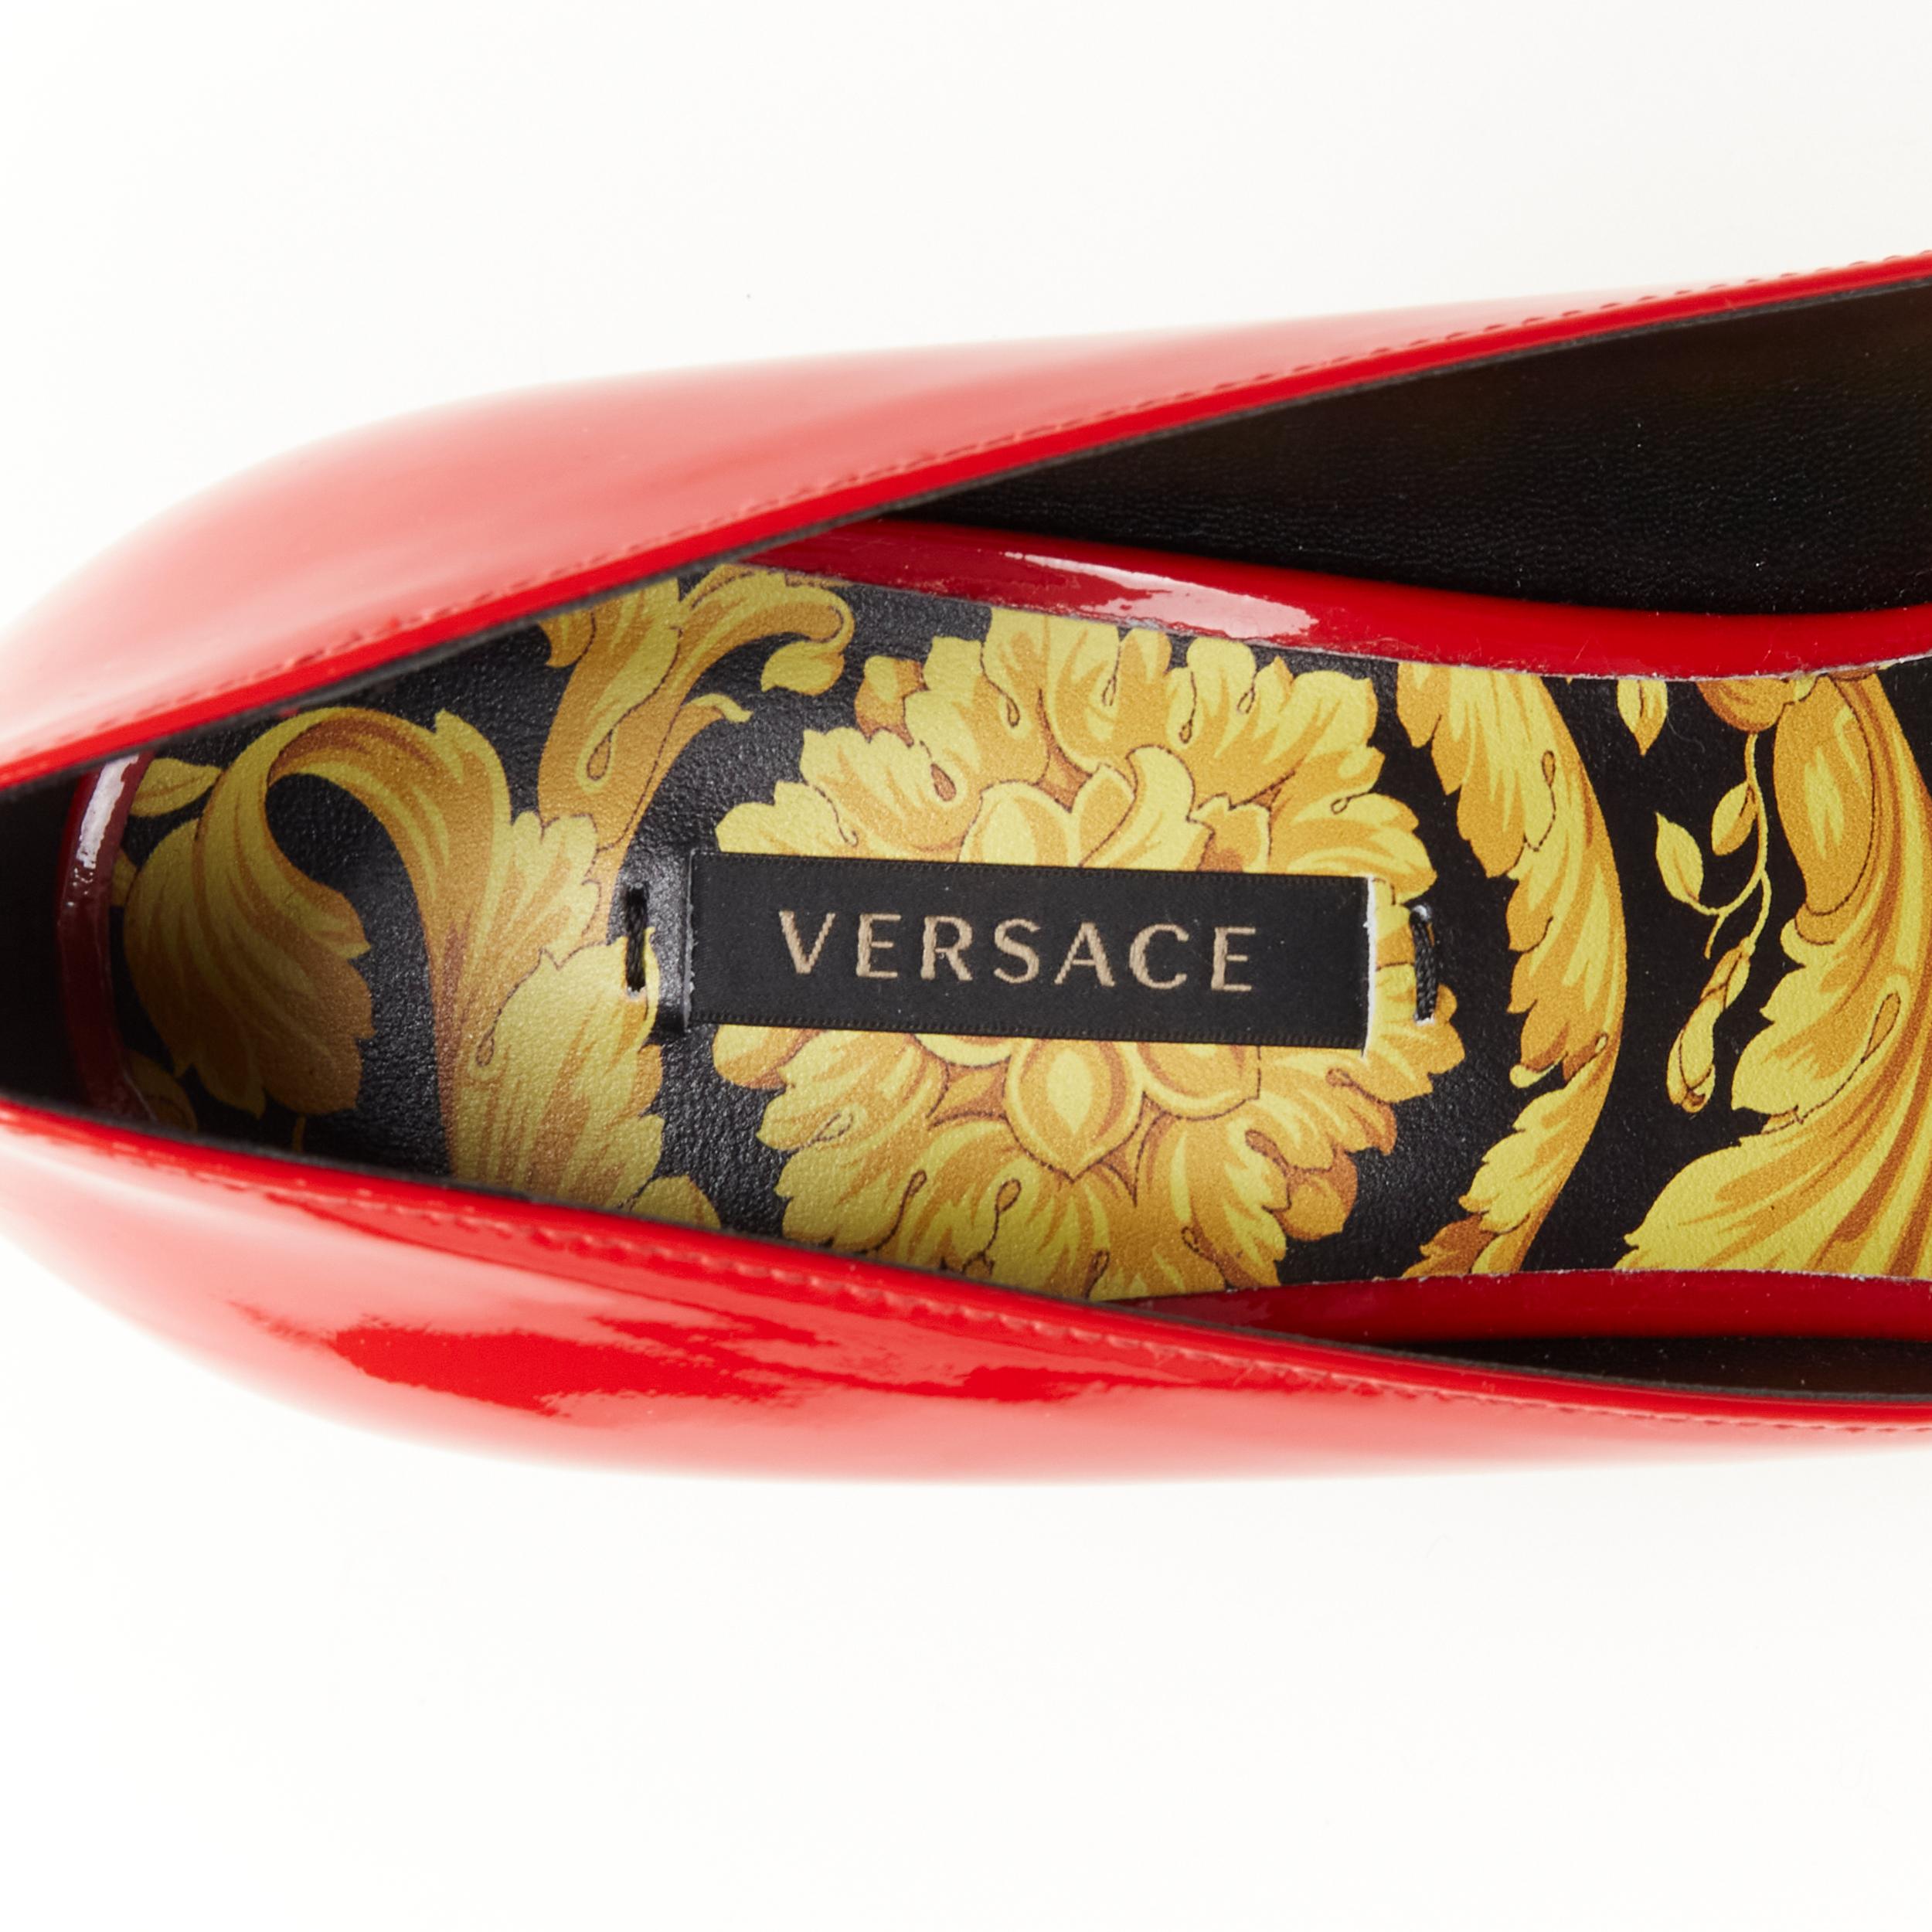 new VERSACE Hibiscus Barocco Eros red patent floral sole Medusa pump US8 EU38 For Sale 3